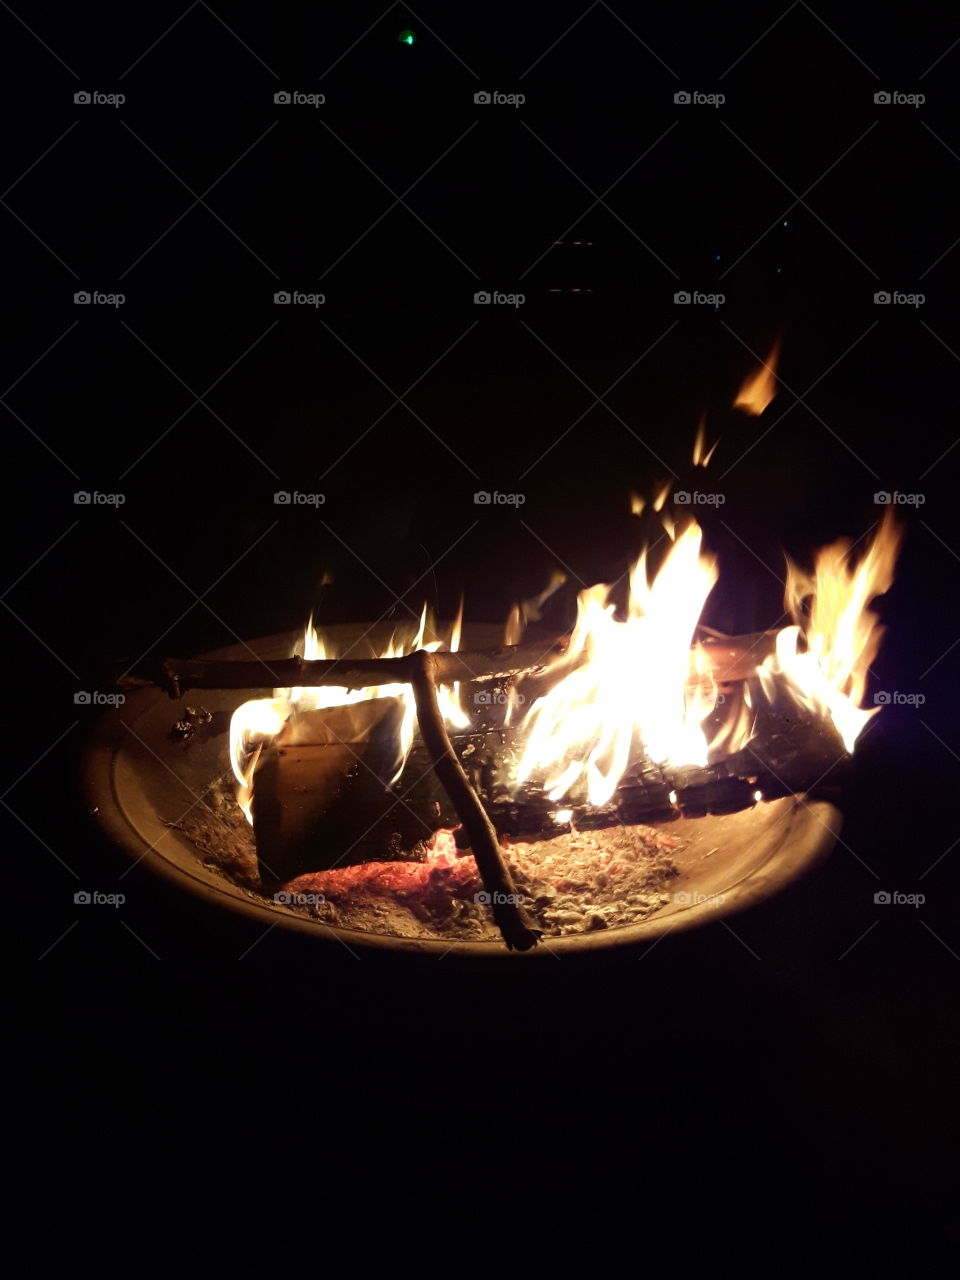 Night time fire